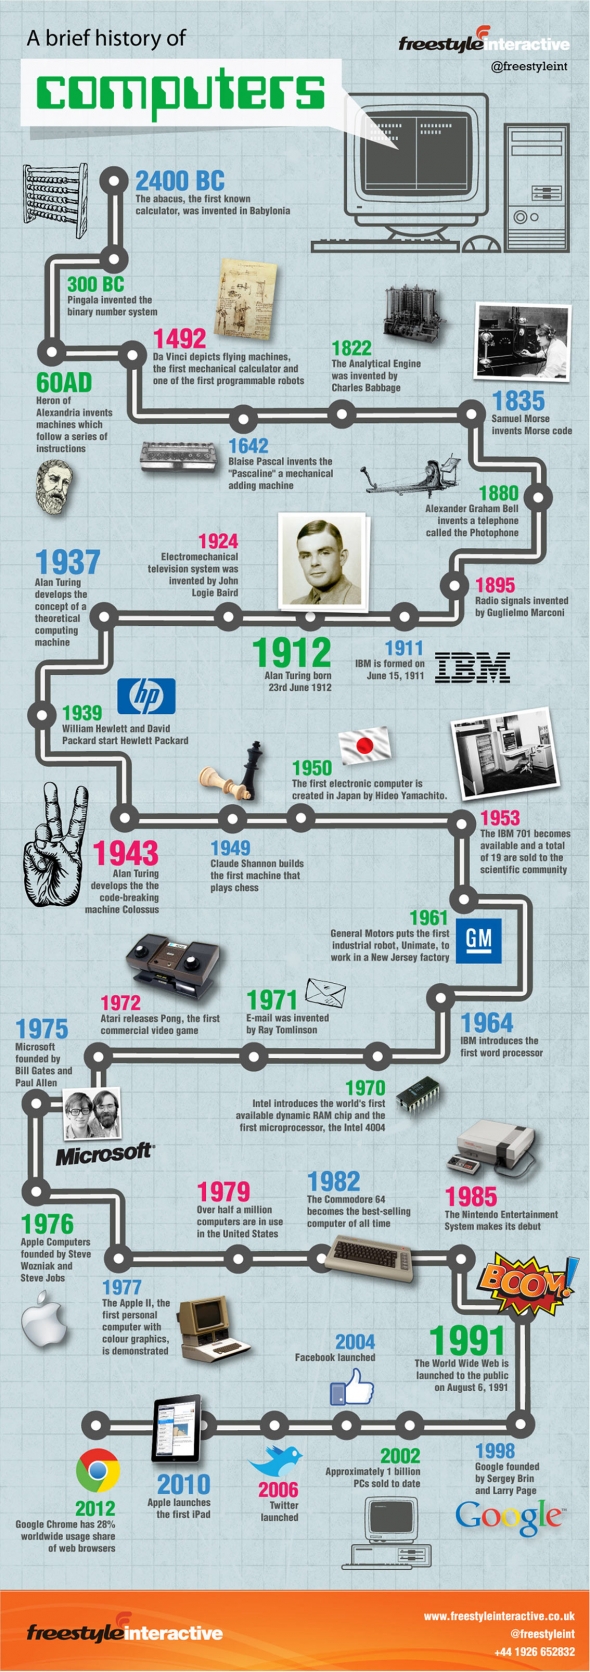 A Brief History of Computers [Infographic]